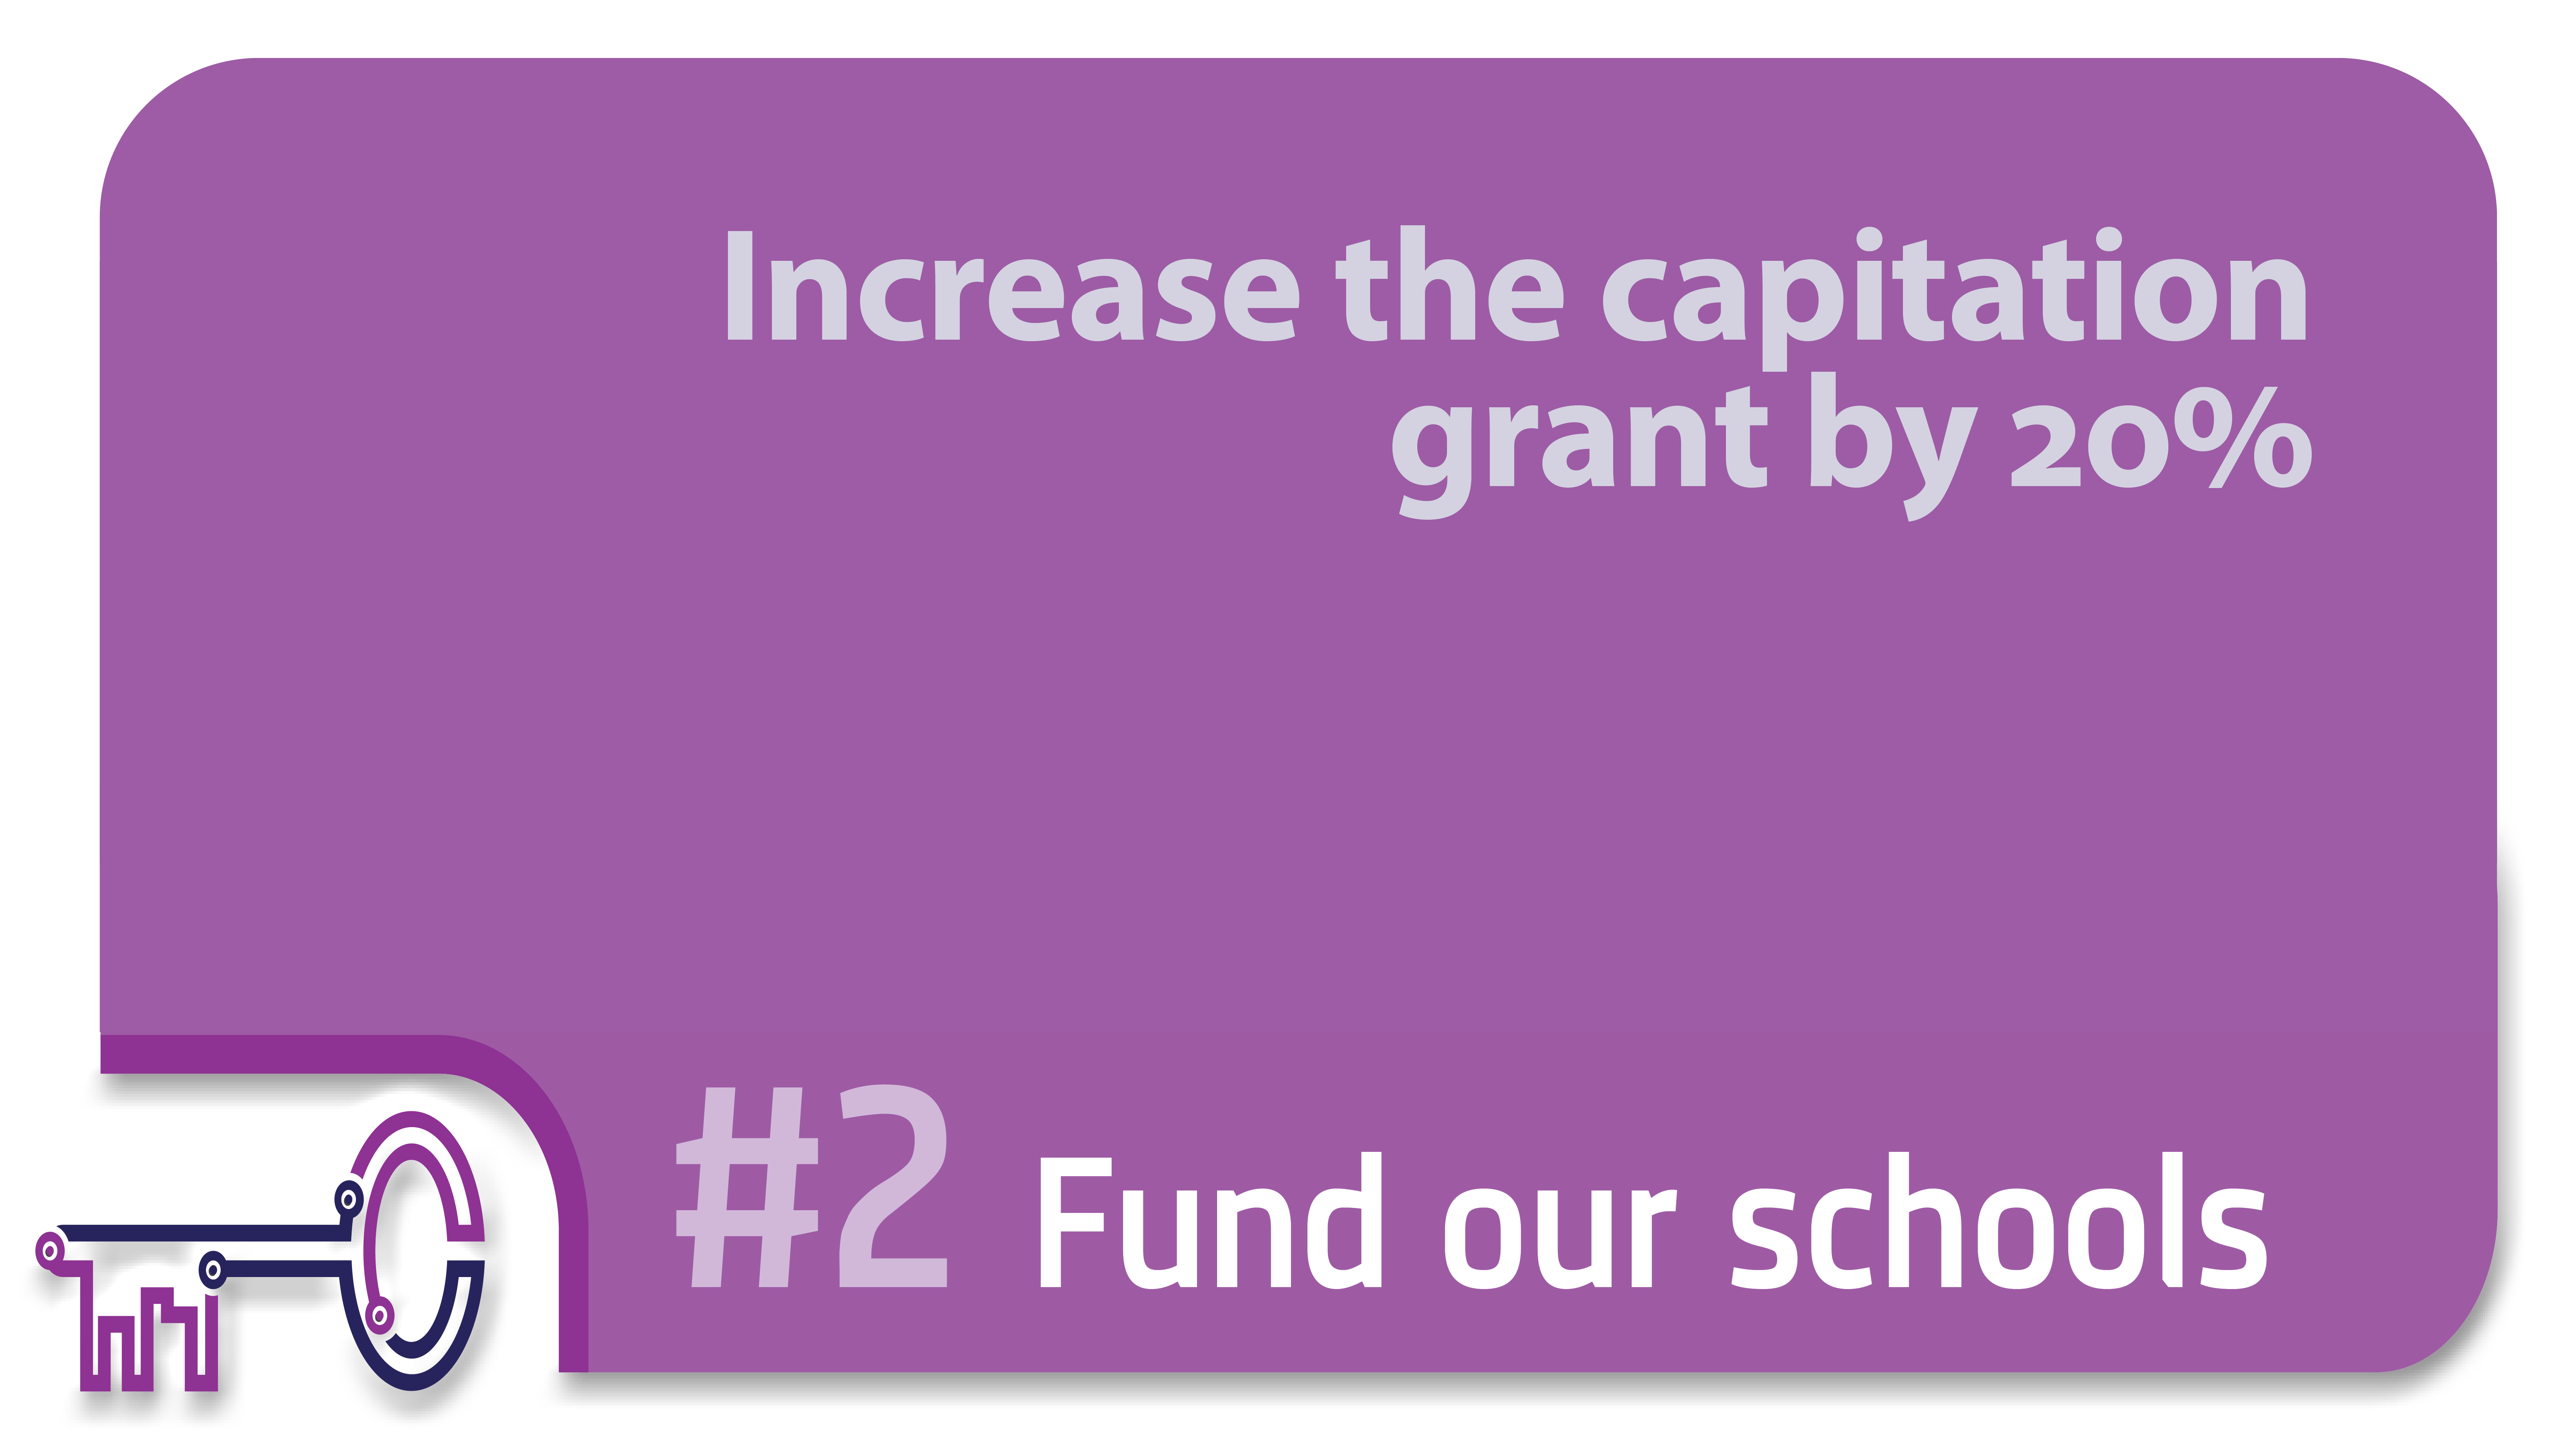 Fund our schools